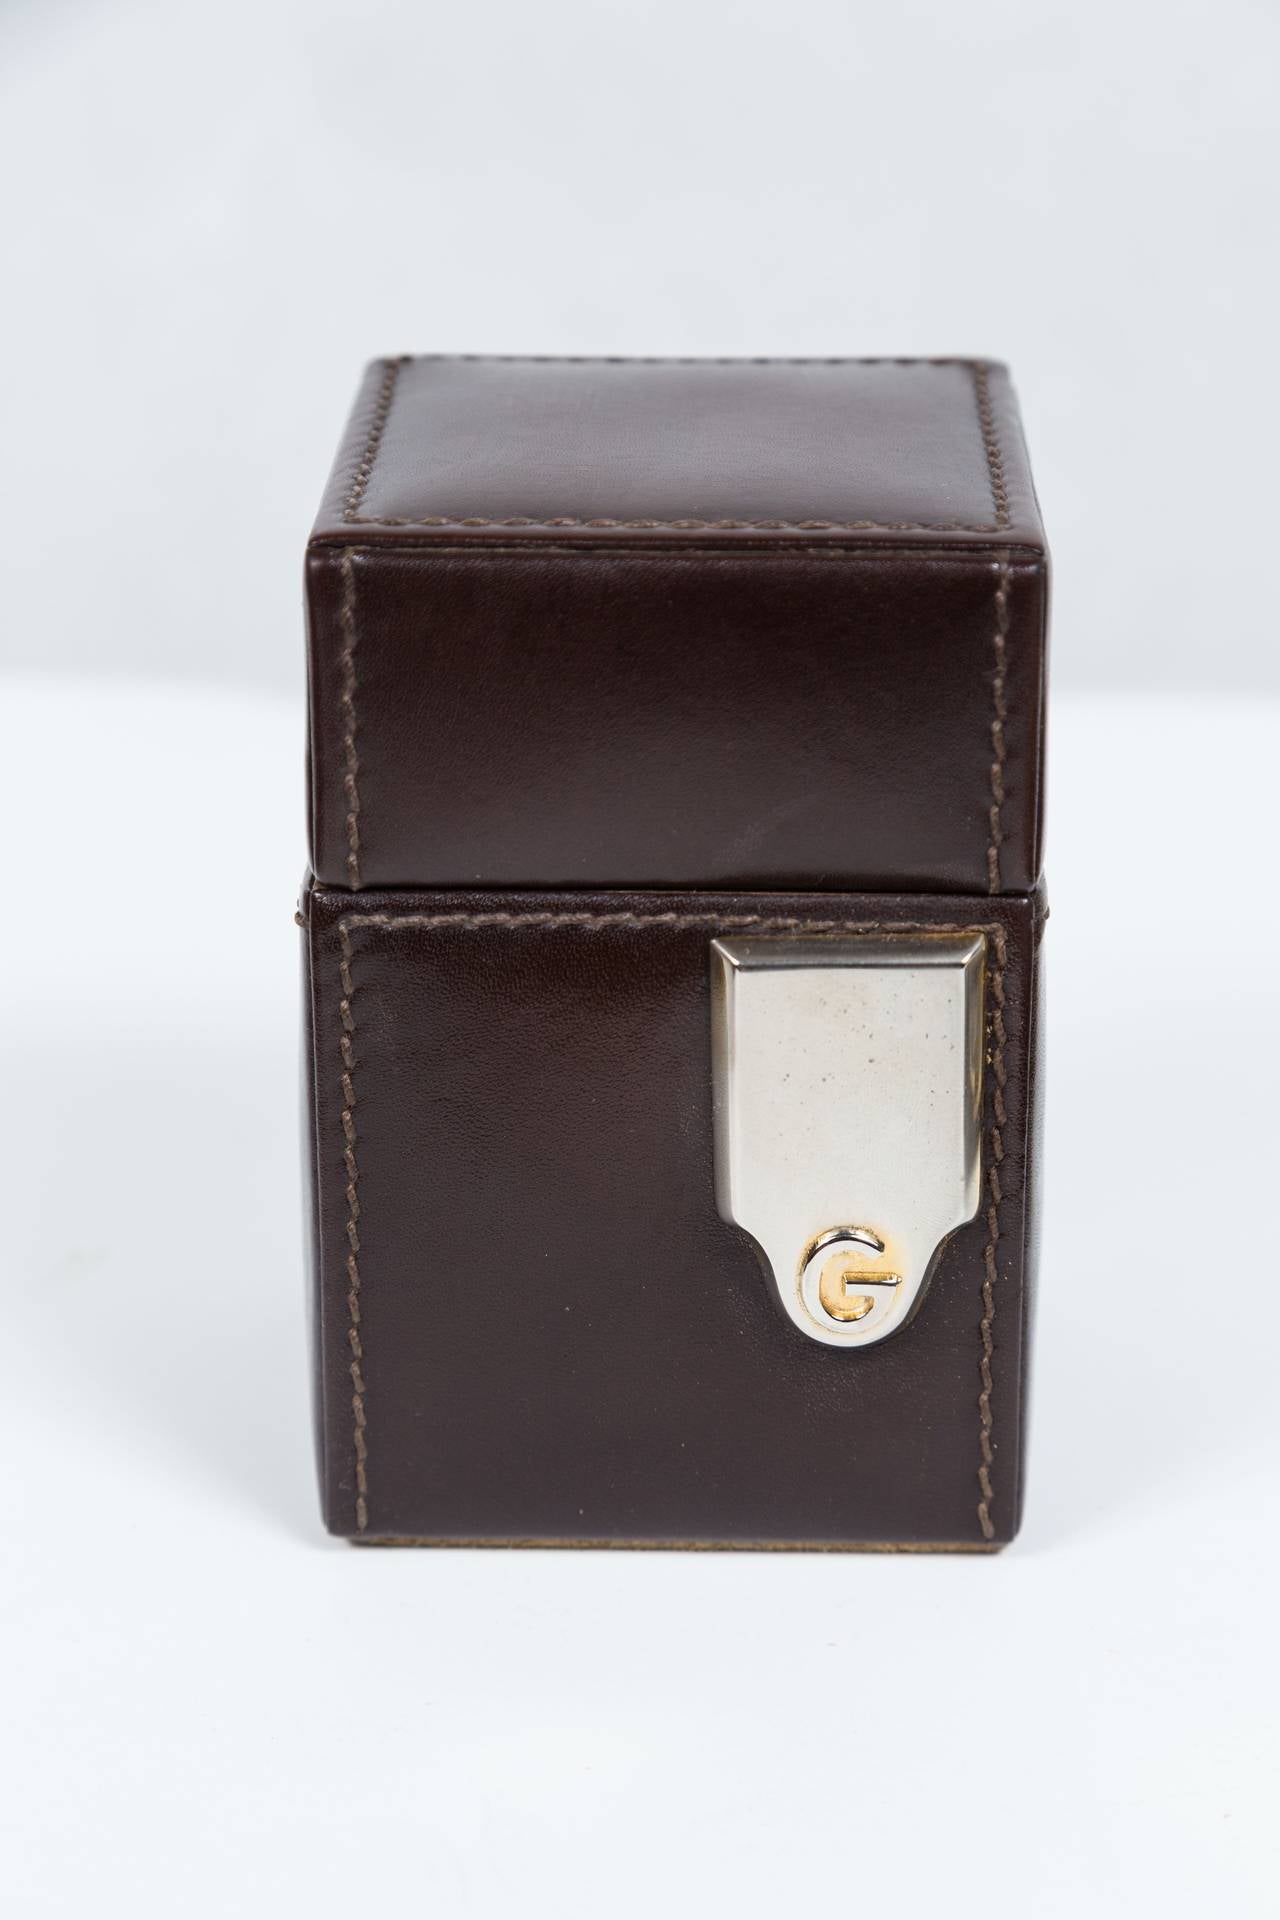 Handsome set features a writing pad, lighter and cigarette box lined in Mahogany with a center divider. All in excellent condition. Pieces are clad in brown leather with suede undersides and feature metal mounts with the 